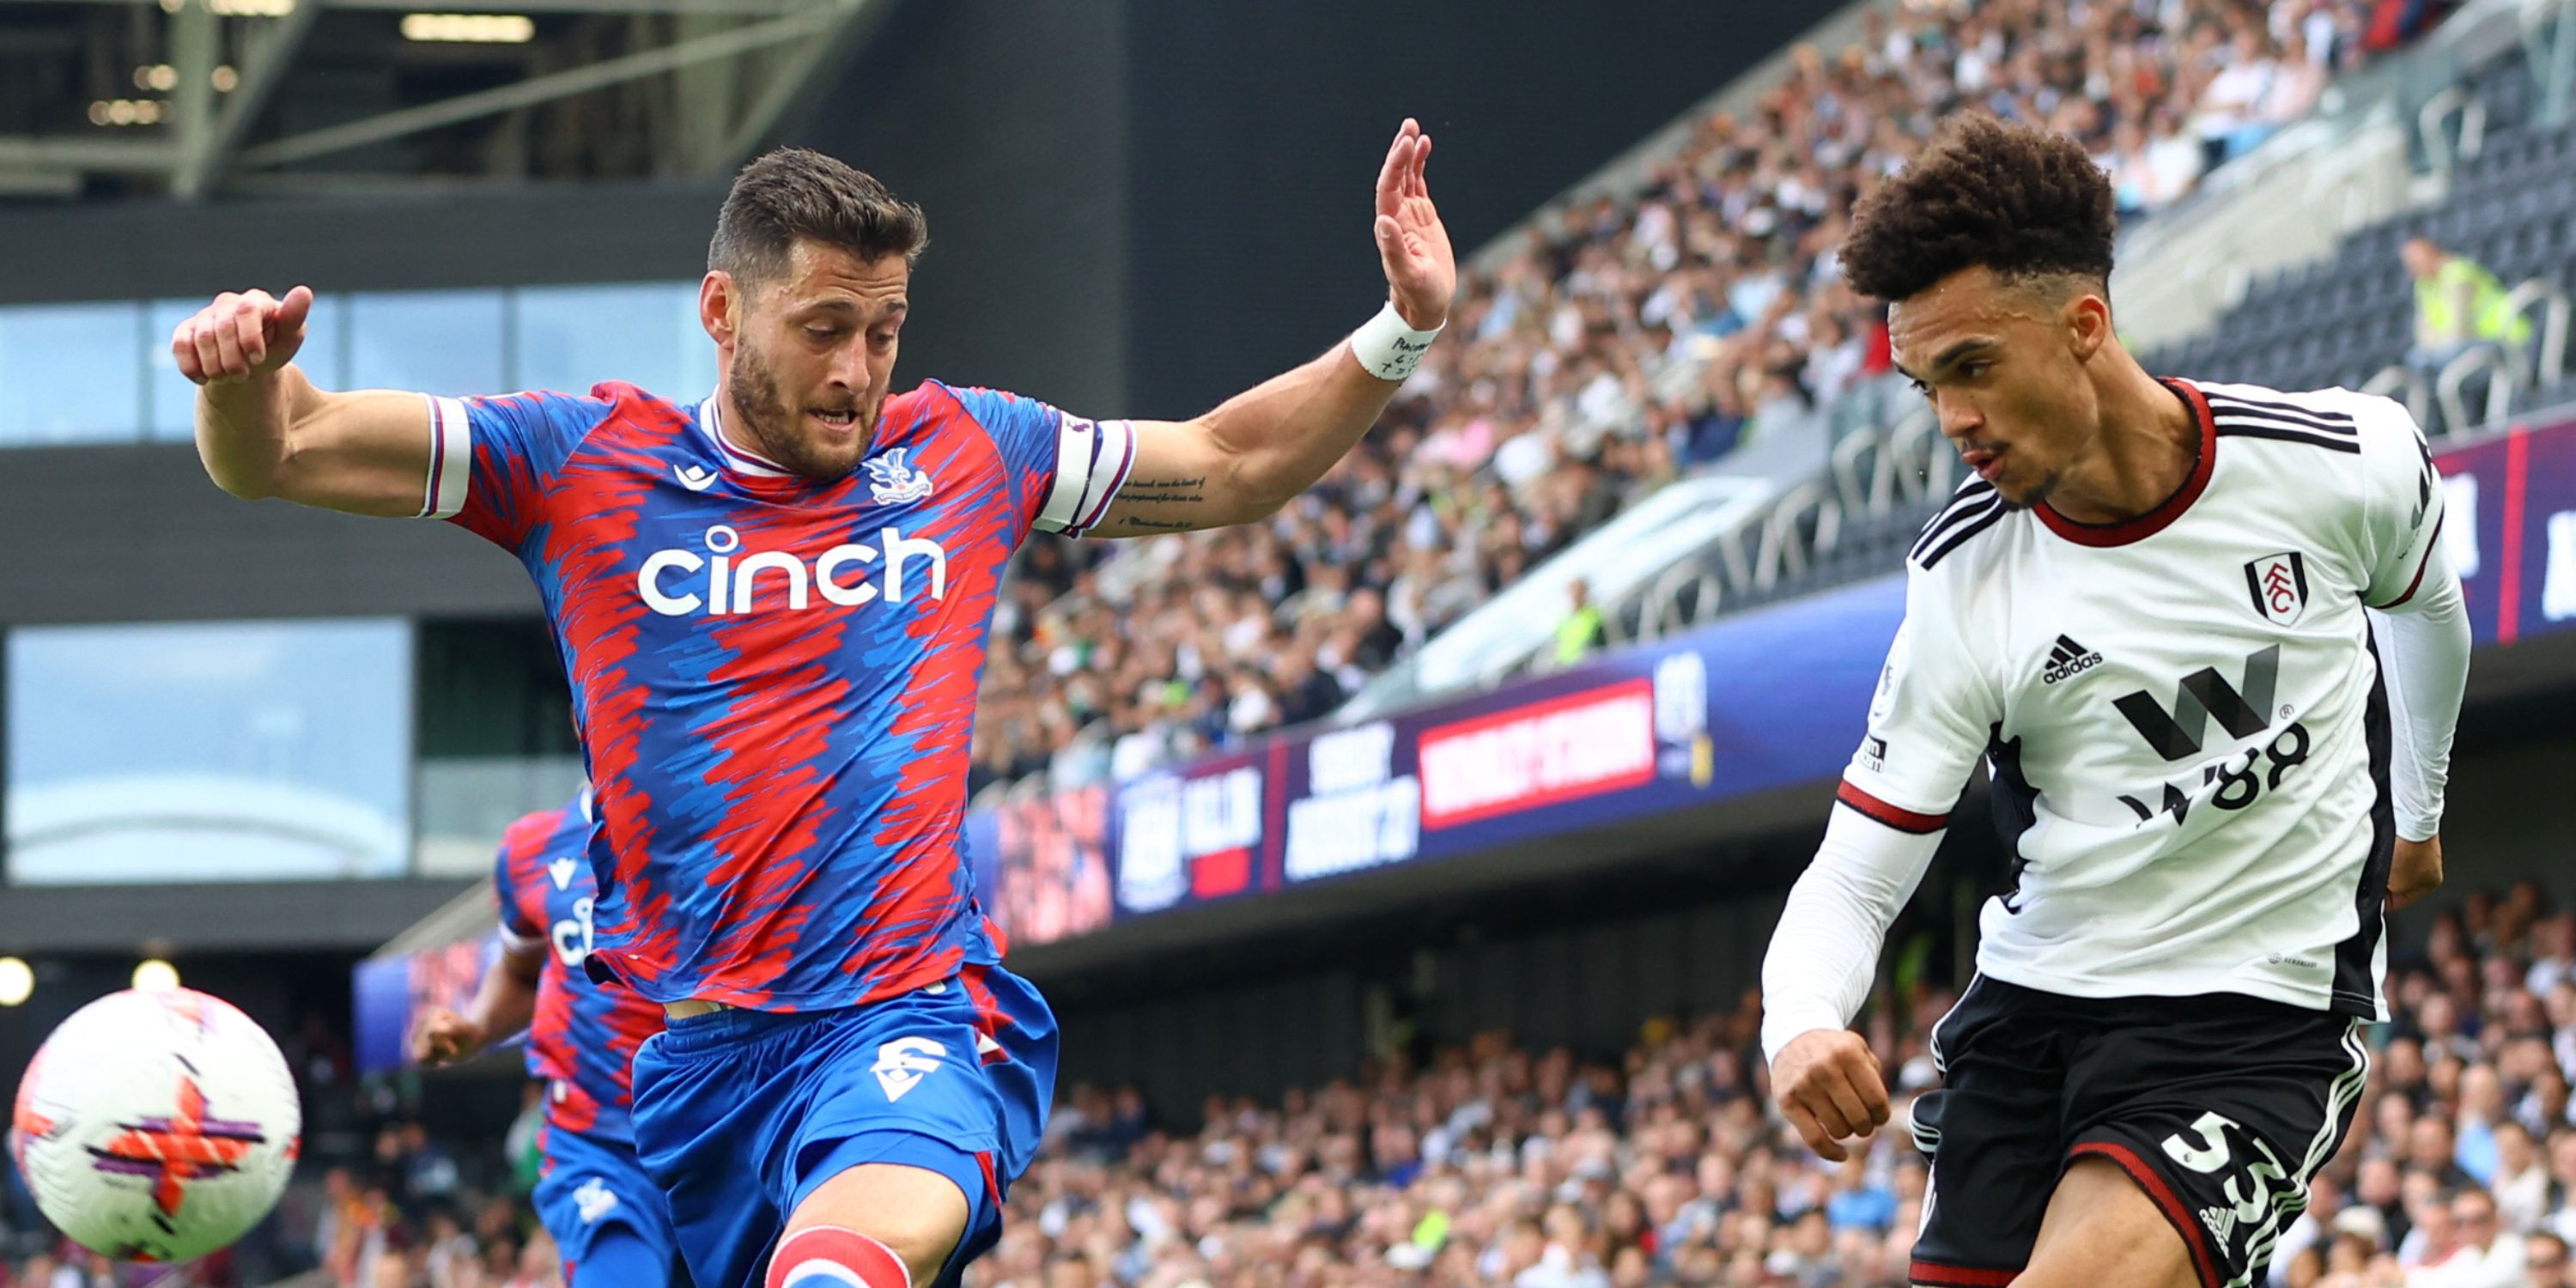 Crystal Palace vs Fulham: Head-to-head record, key stats & more